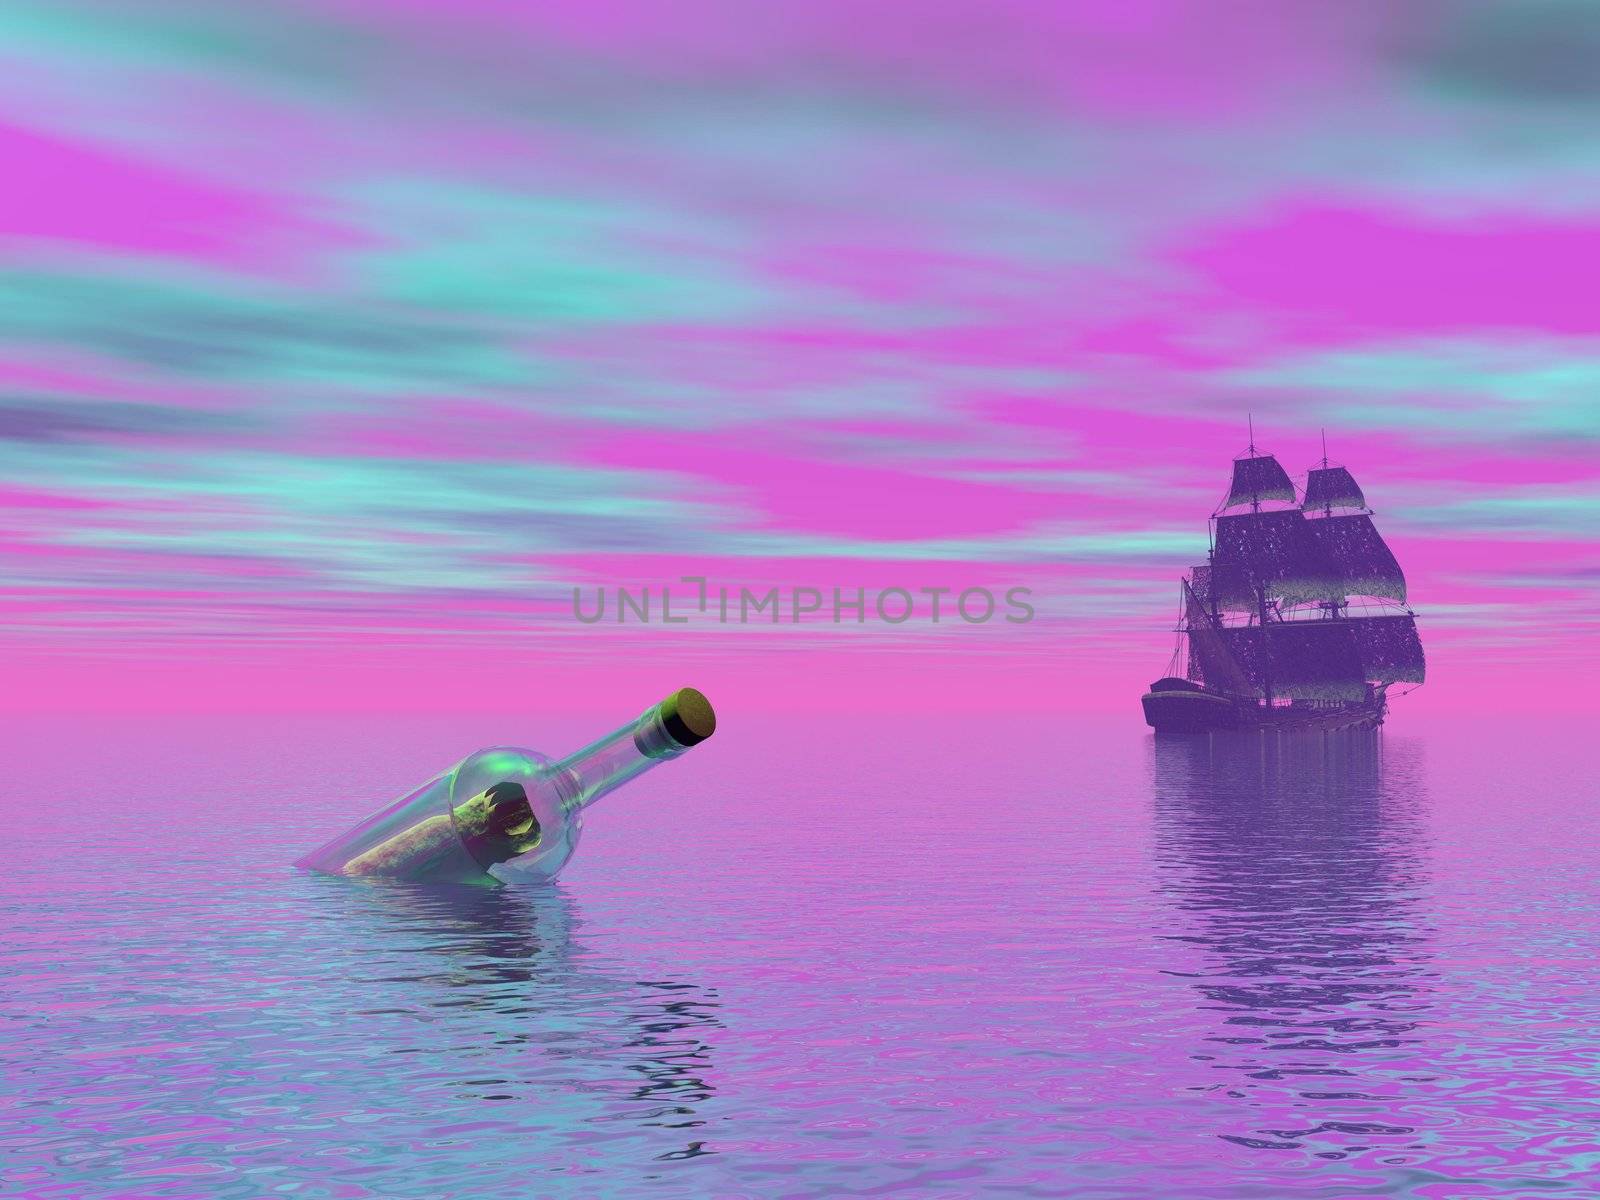 Message in a bottle and blurry old boat leaving in colorful cloudy background sky